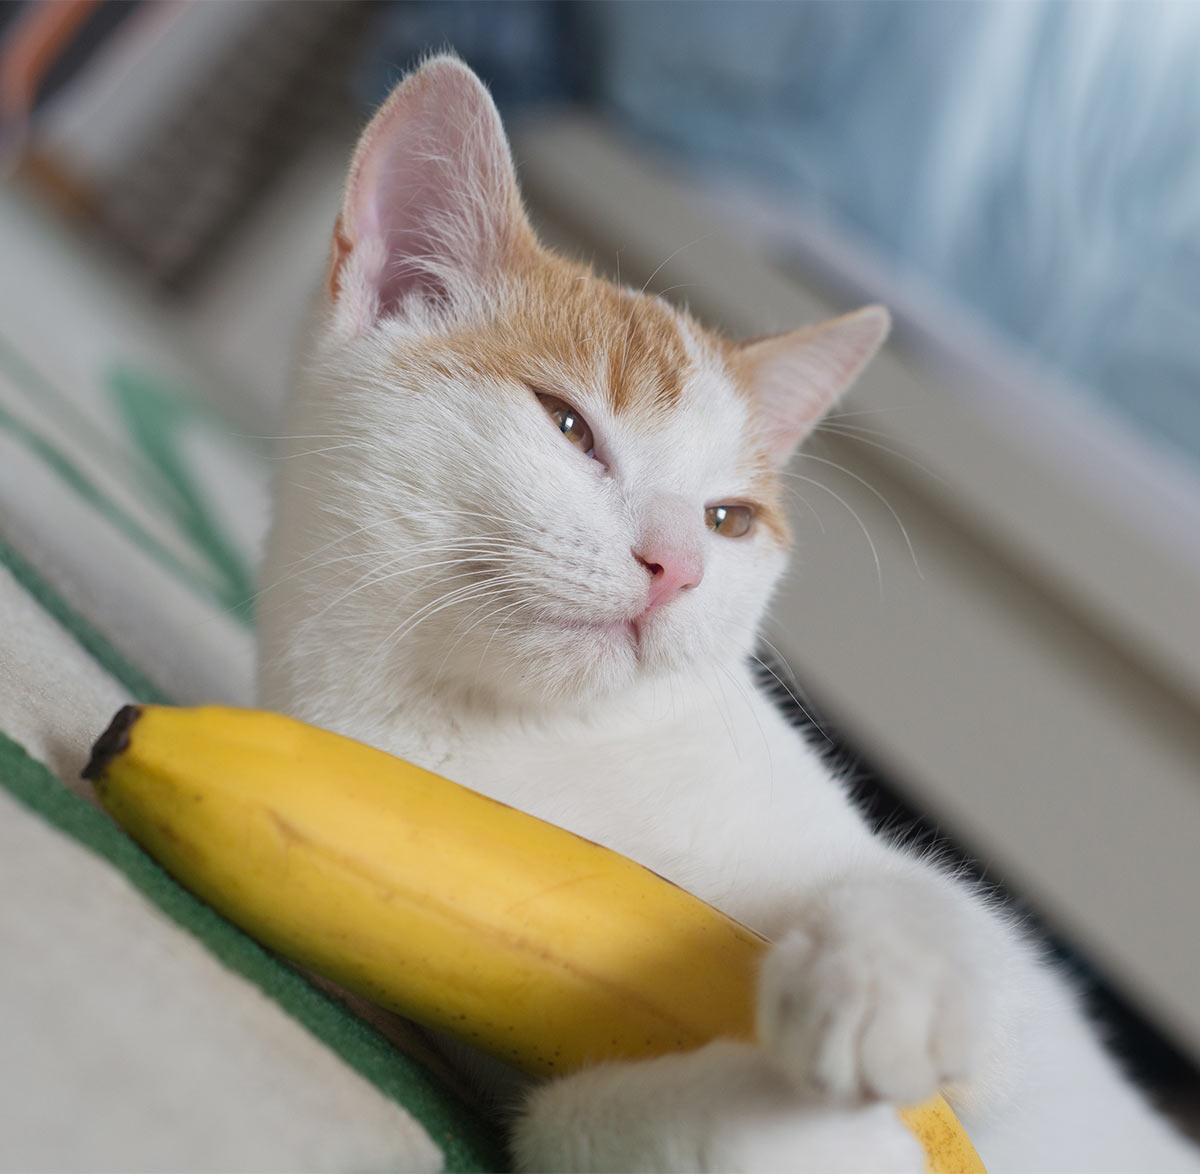 Can Cats Eat Bananas Safely A Full Guide To Bananas For Cats